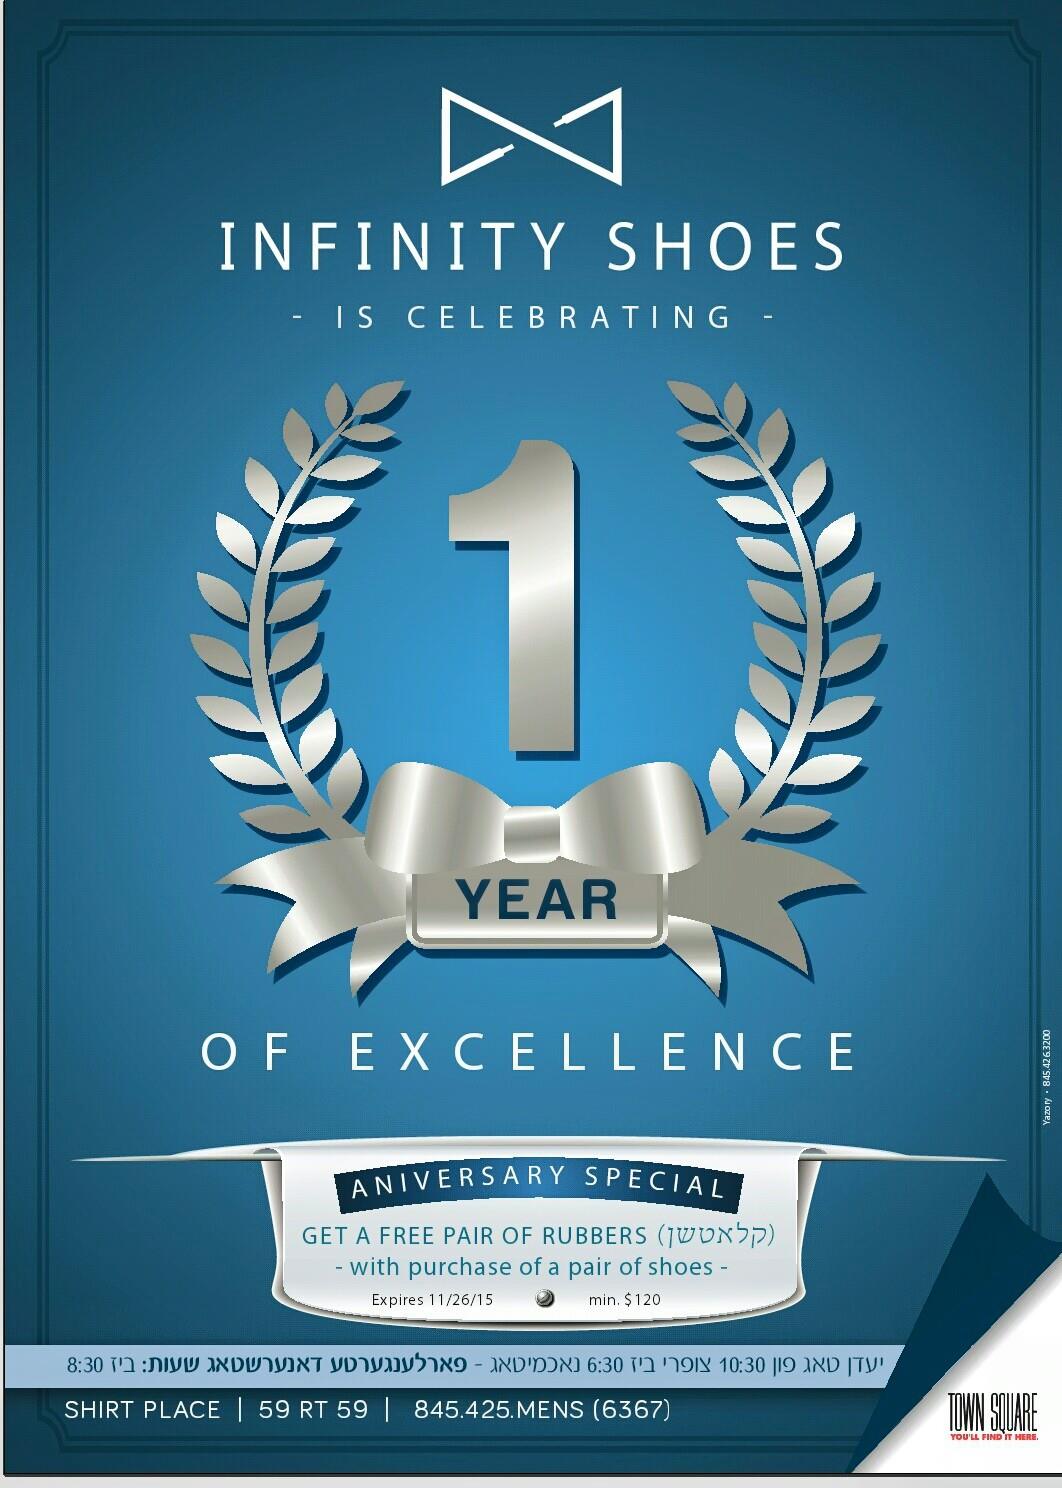 INFINITY SHOES